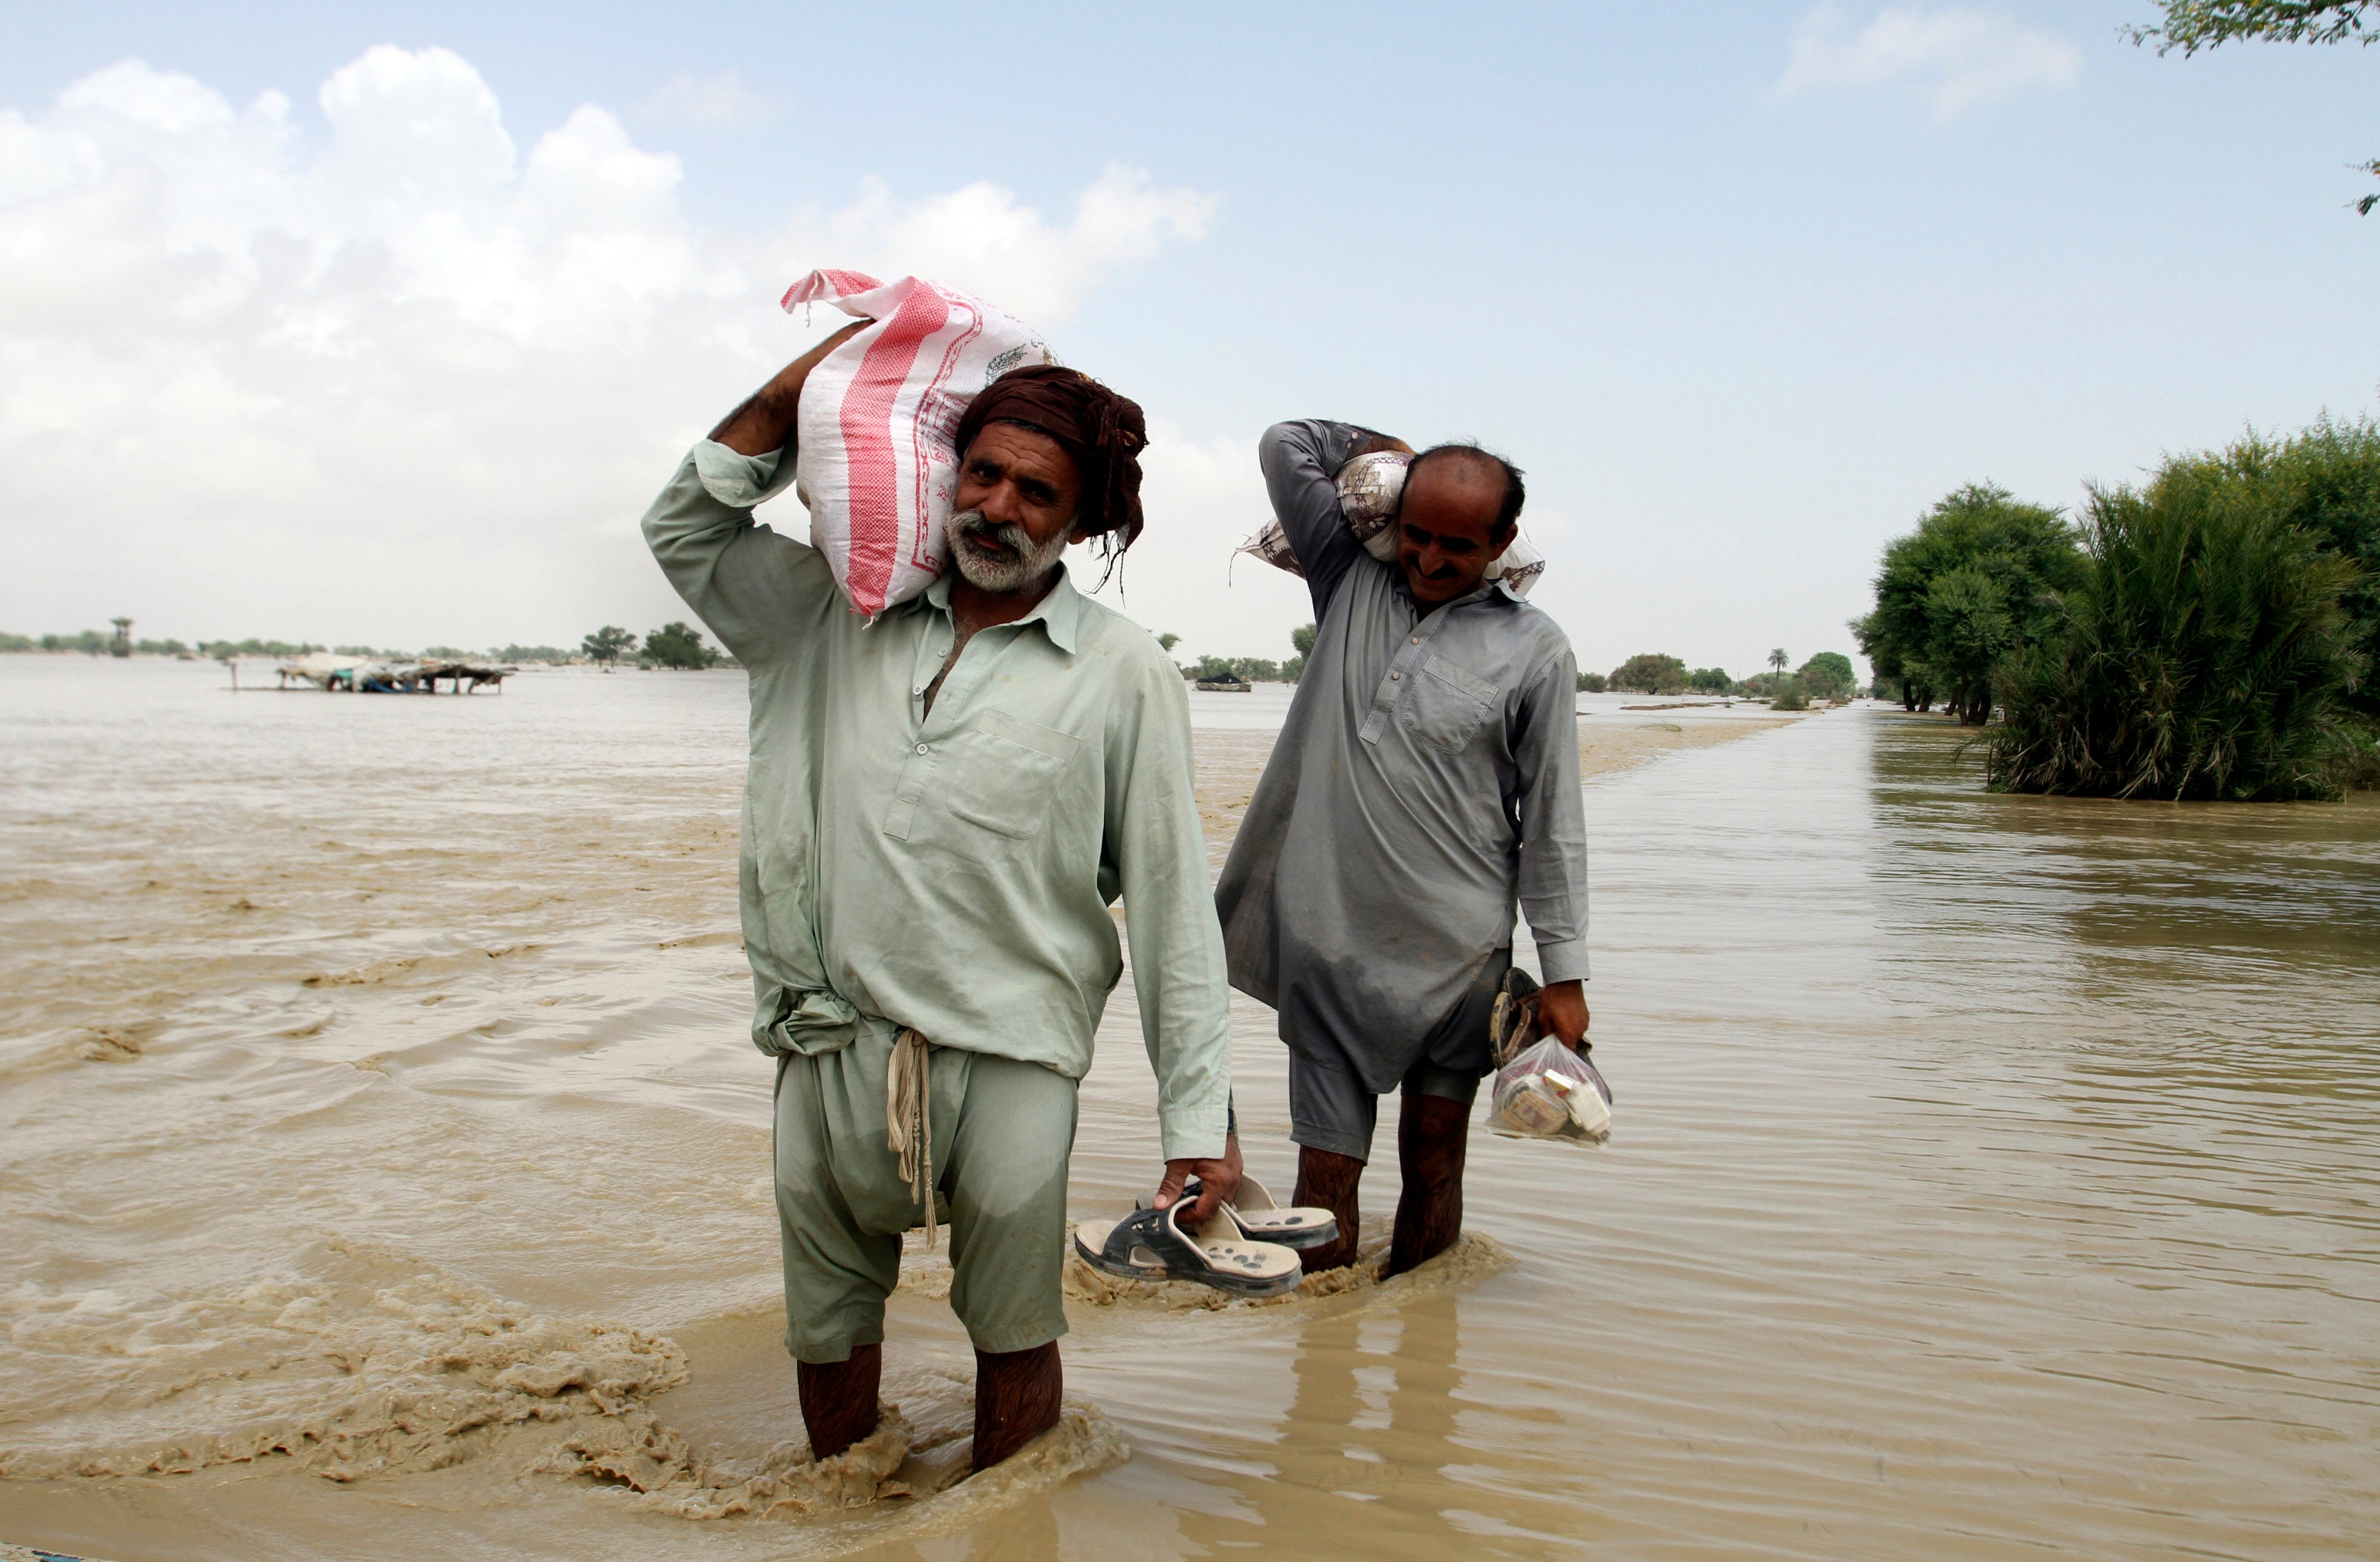 Pakistan floods: death toll tops 1,000 as tens of thousands forced to flee  their homes overnight | South China Morning Post